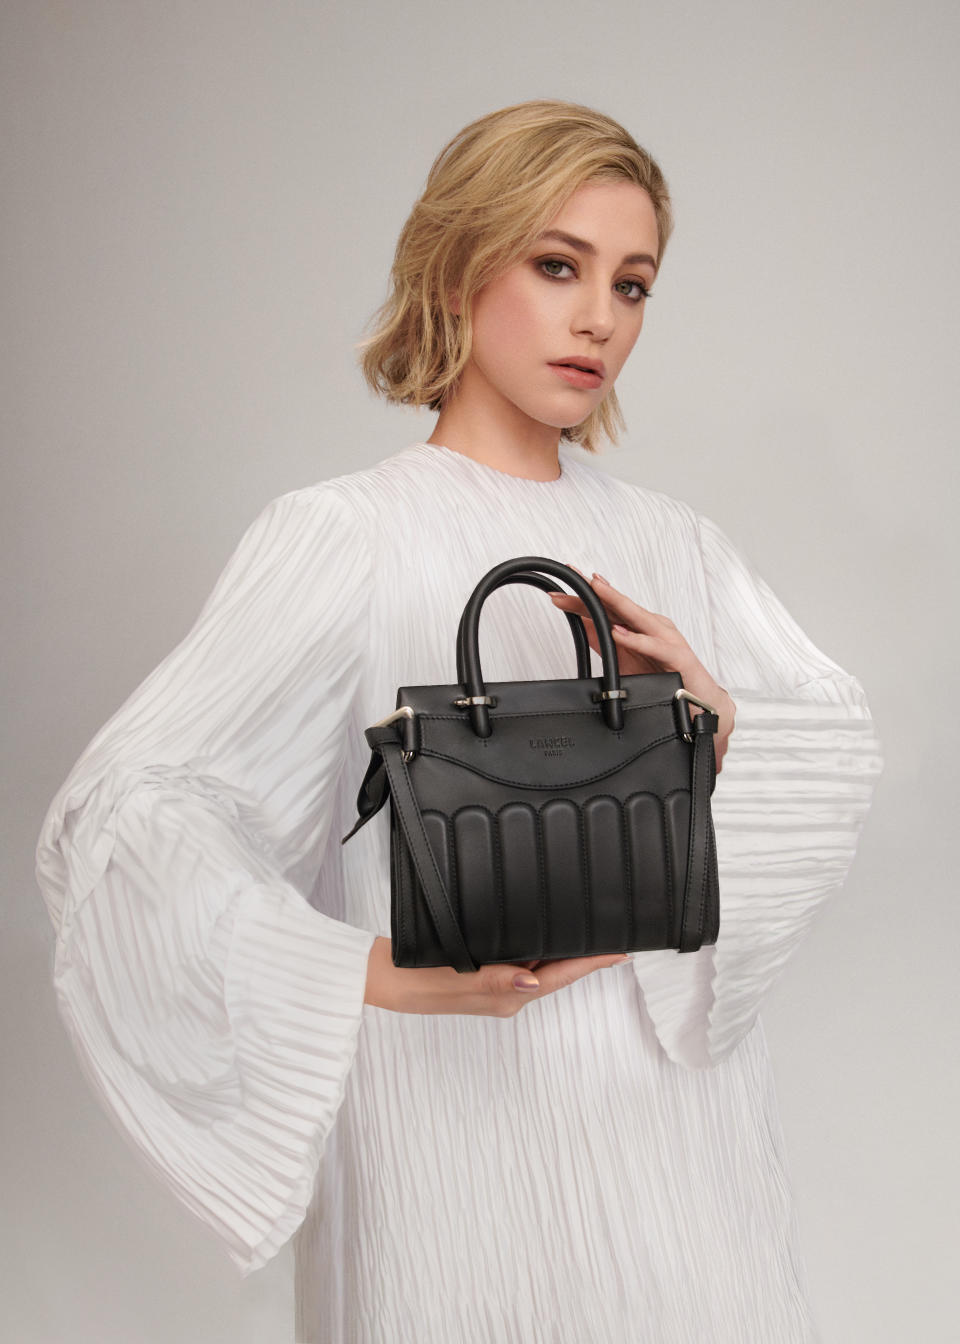 Lili Reinhart with the Rodeo bag in Lancel's spring campaign